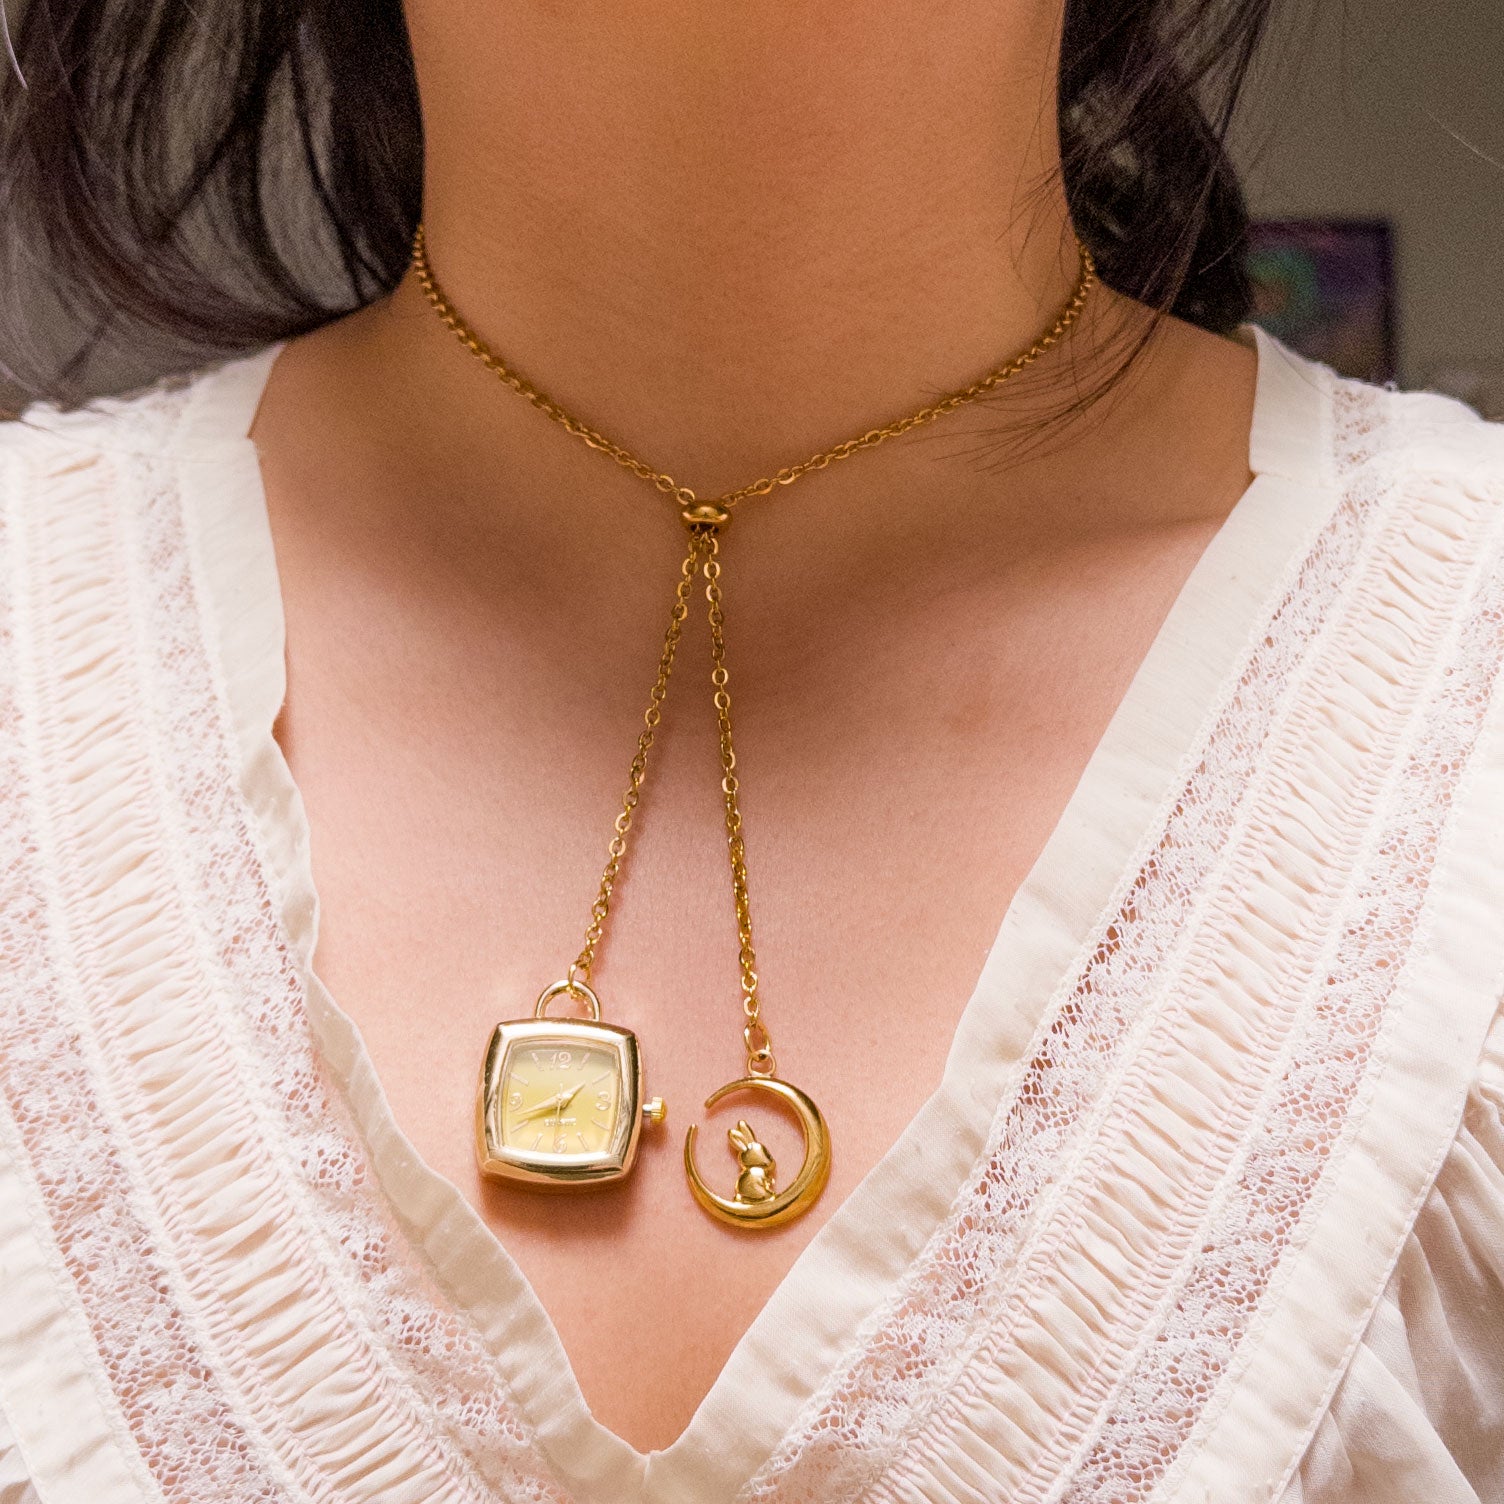 gold lariat sliding necklace with watch and moon charm